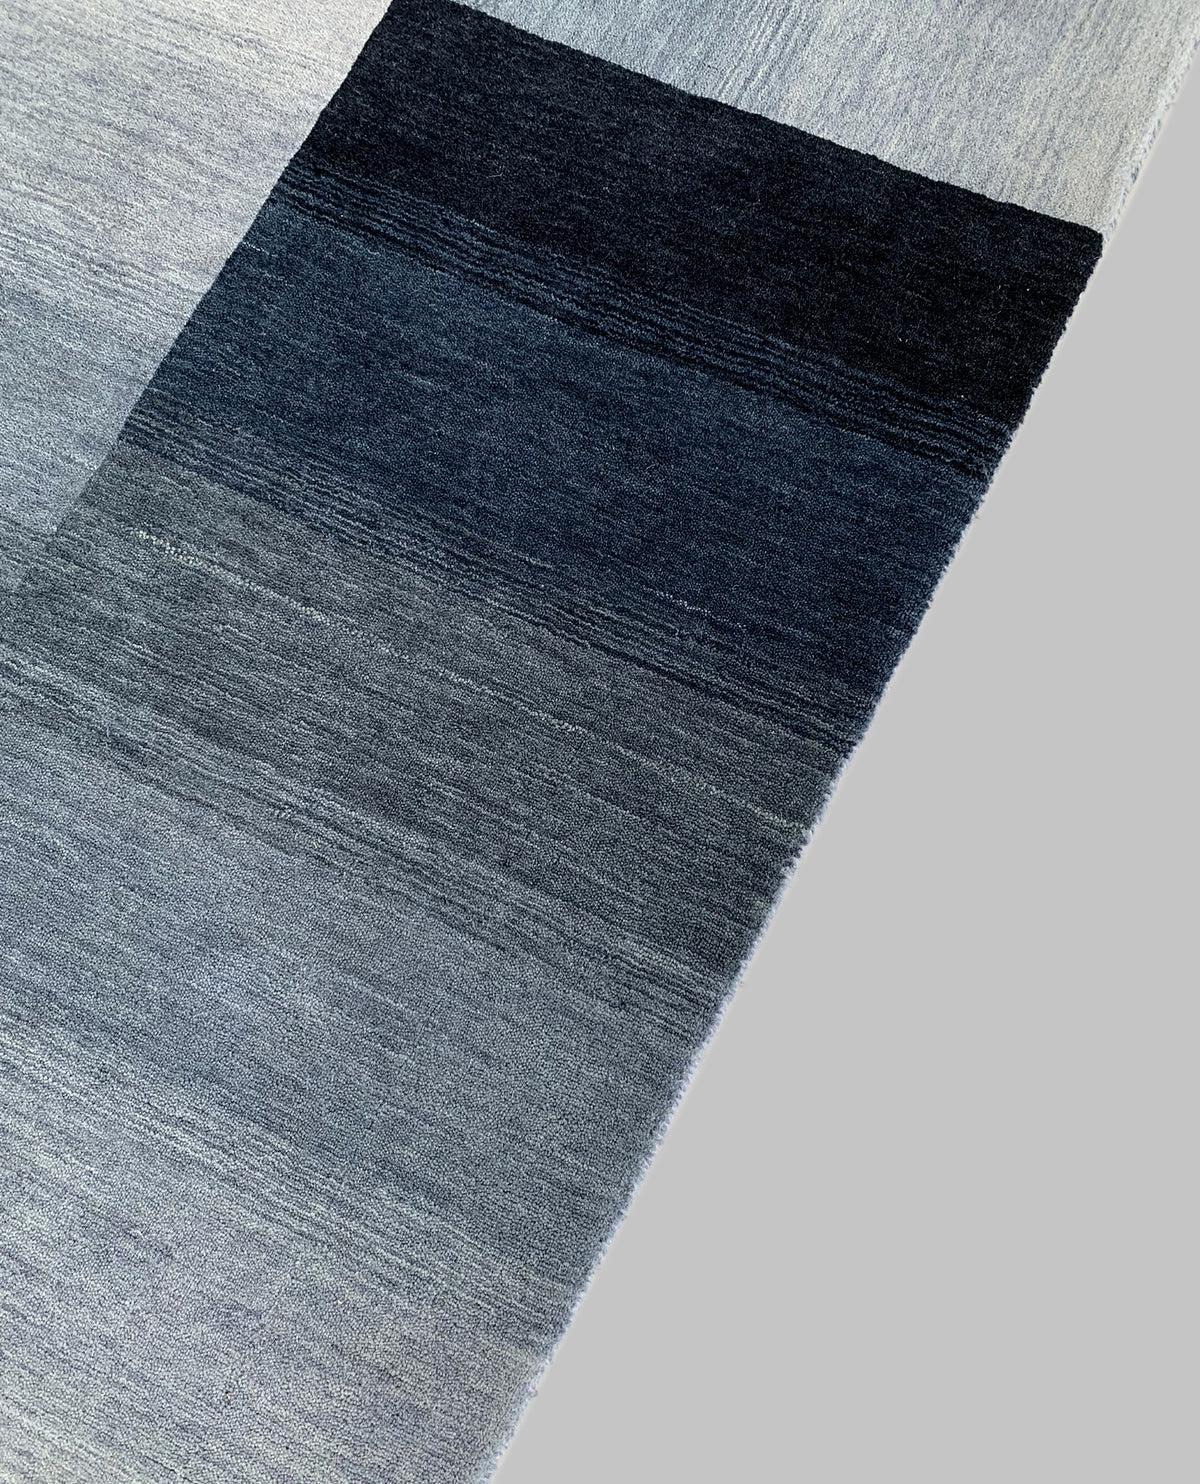 Rugslane Hand Knotted Natural Grey Blue Textured Color Border Design Luxurious GABBEH Carpet 4.ft x 6 ft